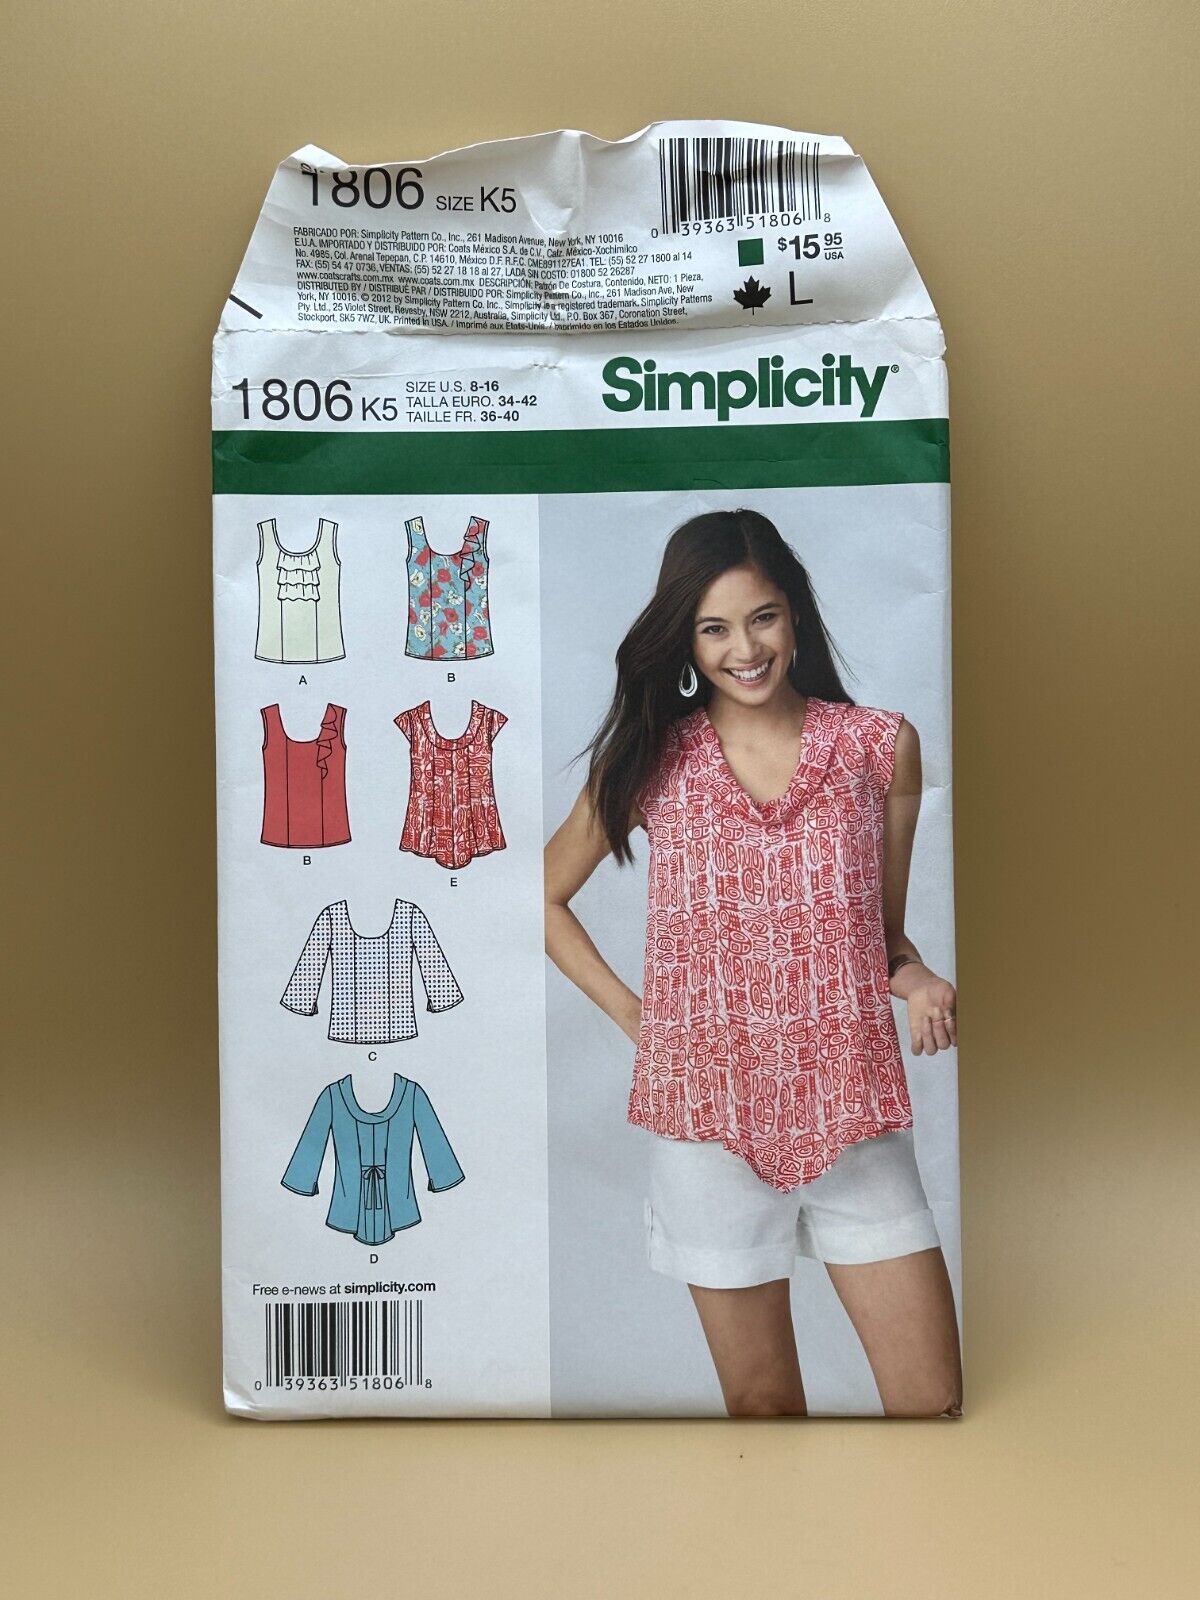 Simplicity Pattern 1806 Miss Pullover Tops Size 8-16 UNCUT FF